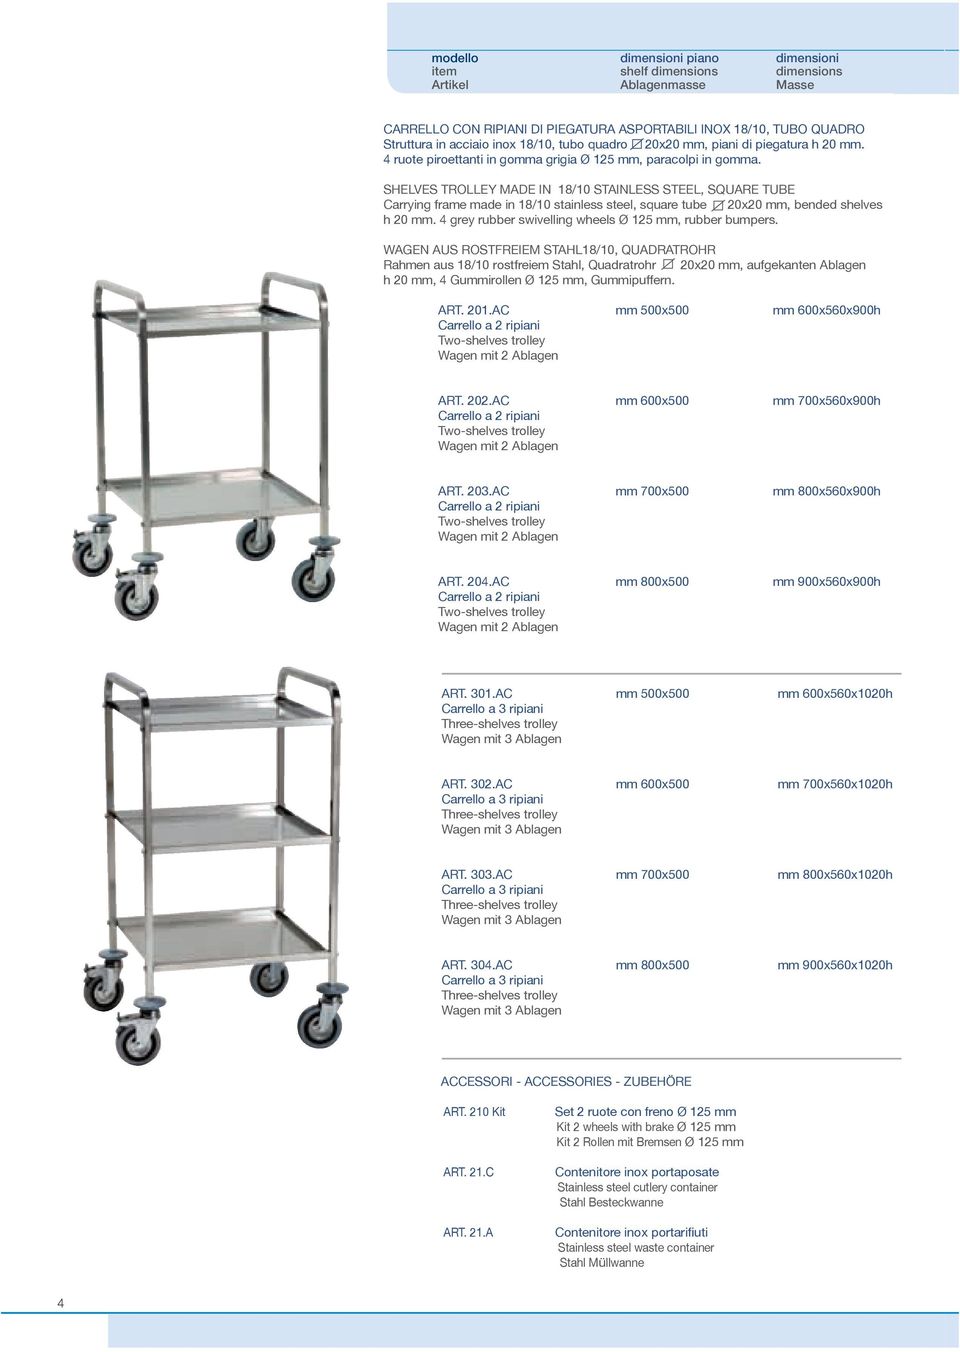 SHELVES TROLLEY MADE IN 18/10 STAINLESS STEEL, SQUARE TUBE Carrying frame made in 18/10 stainless steel, square tube 20x20 mm, bended shelves h 20 mm.